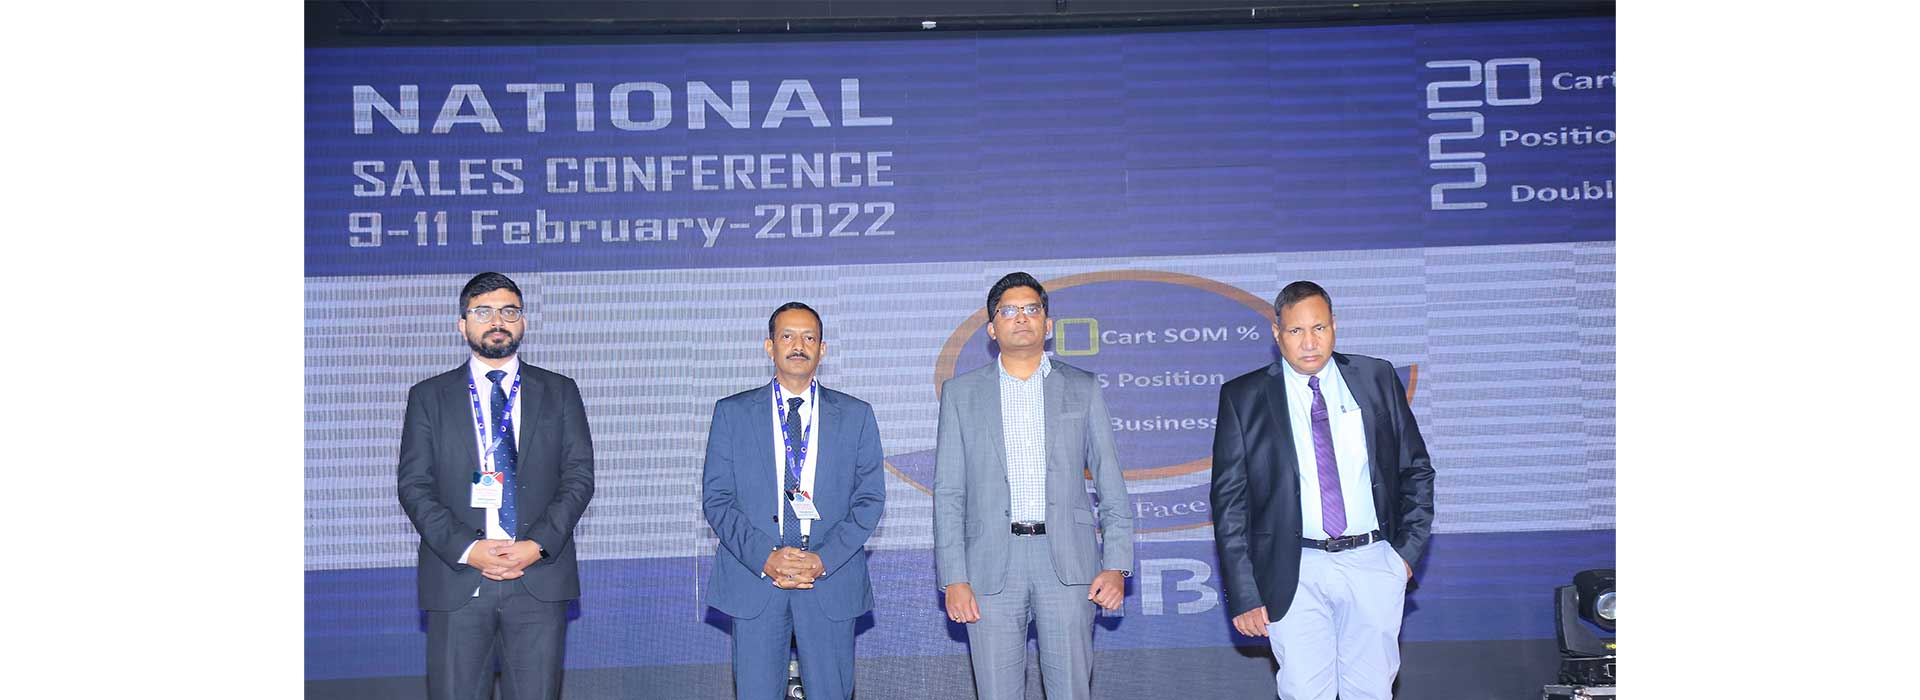 National Sales Conference 2022